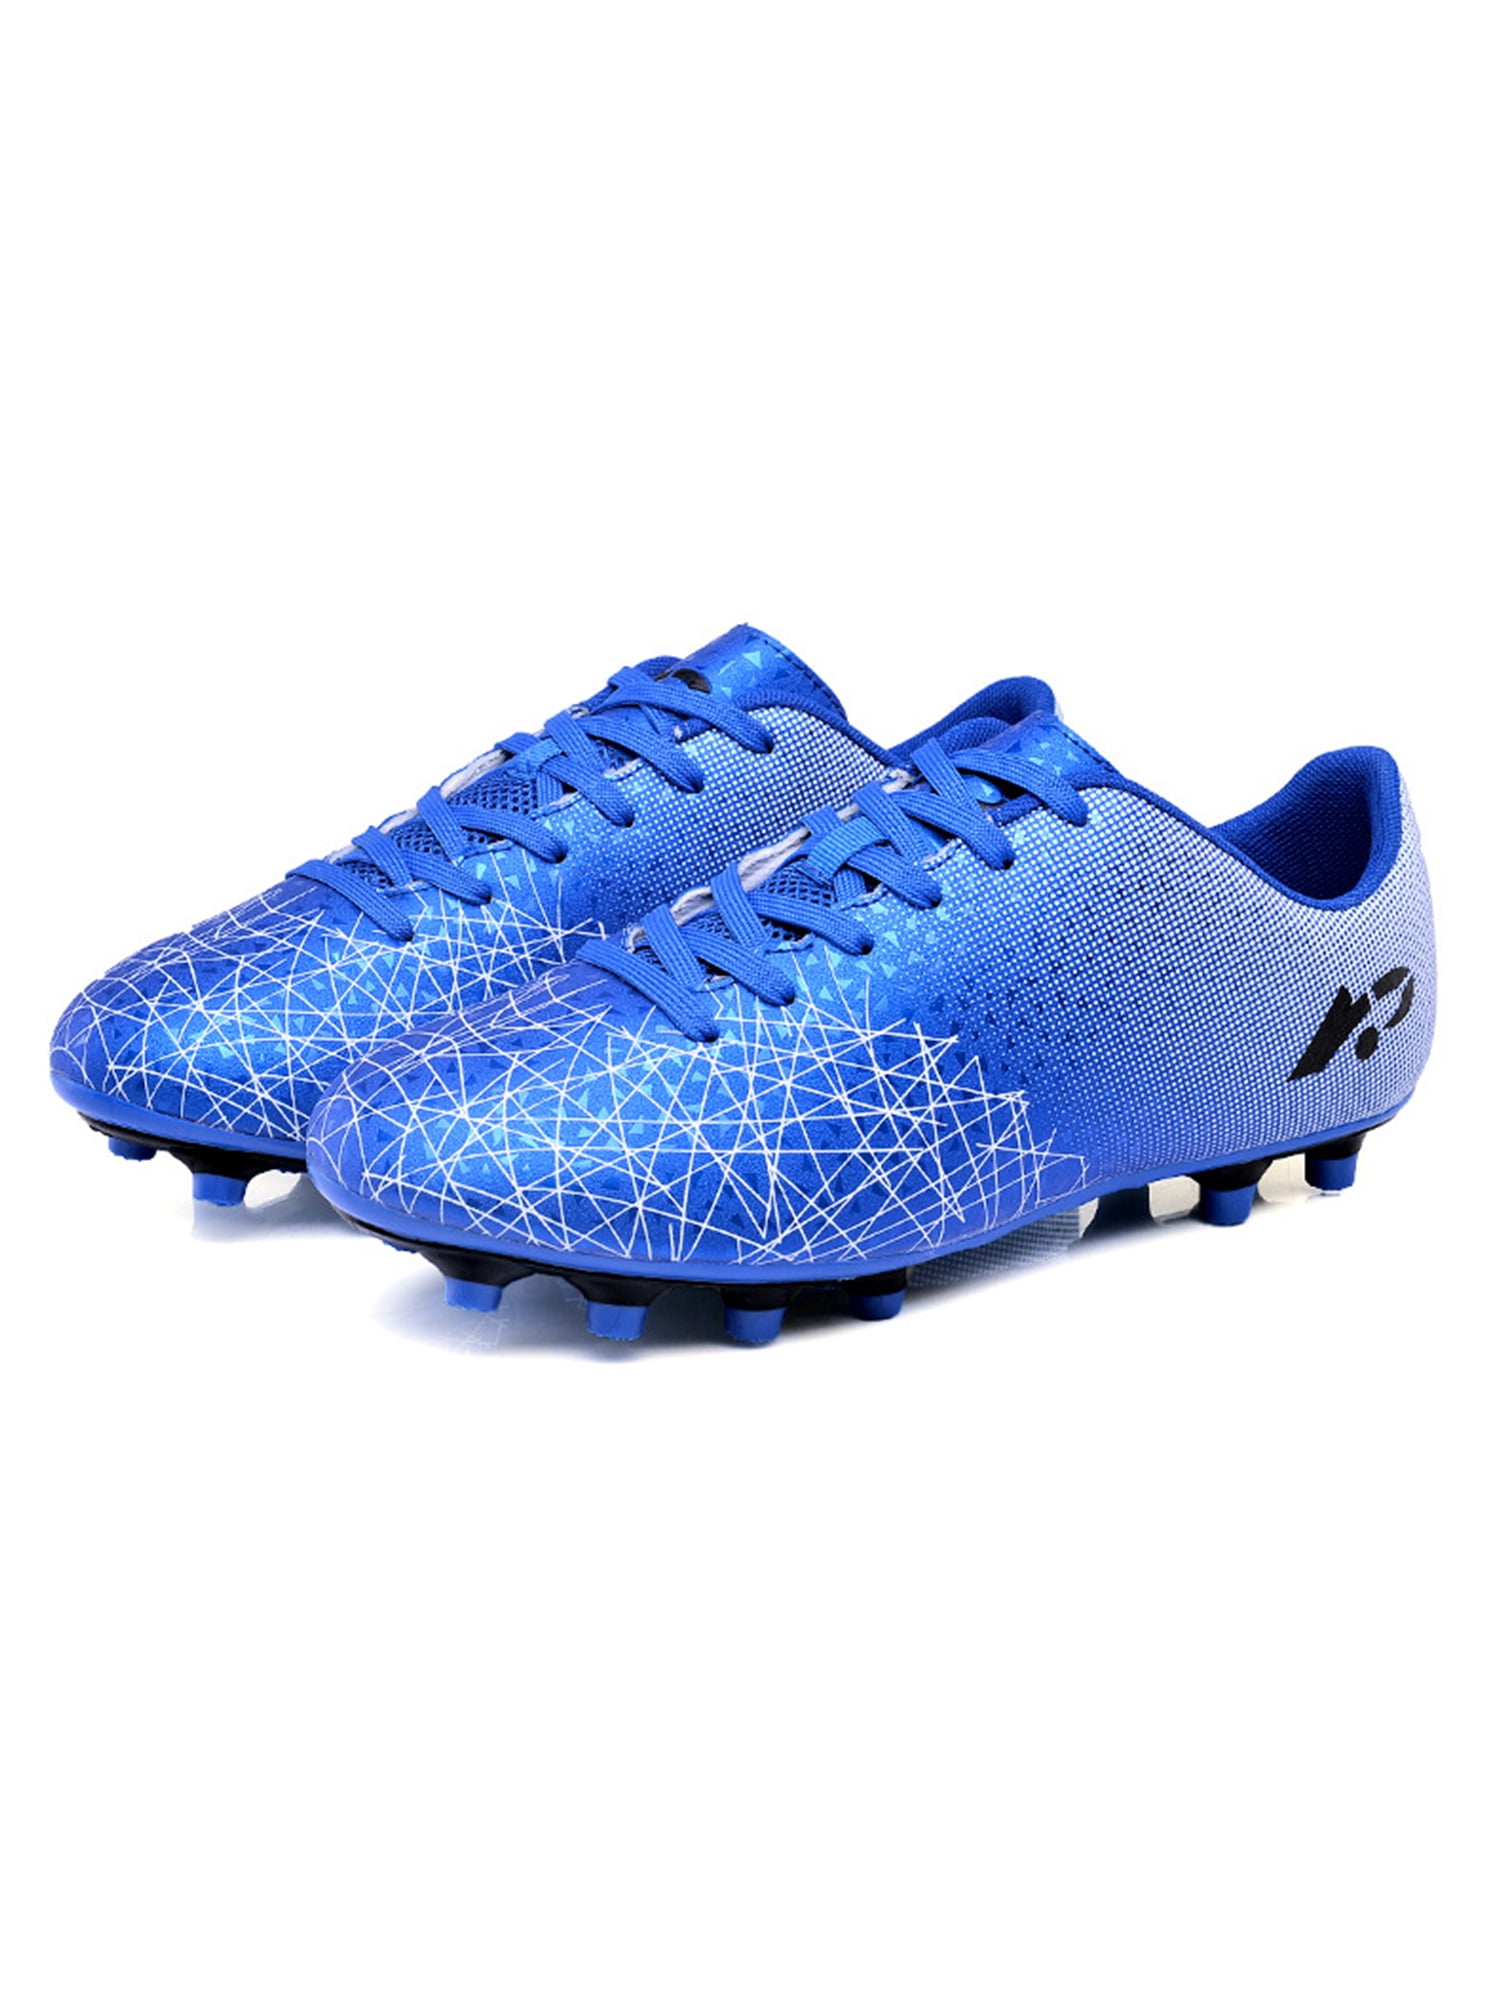 Kids Firm Ground Soccer Cleats Blue FG Outdoor Professional Athletic Football Shoes for Boys and Girls Unisex 4.5 US 